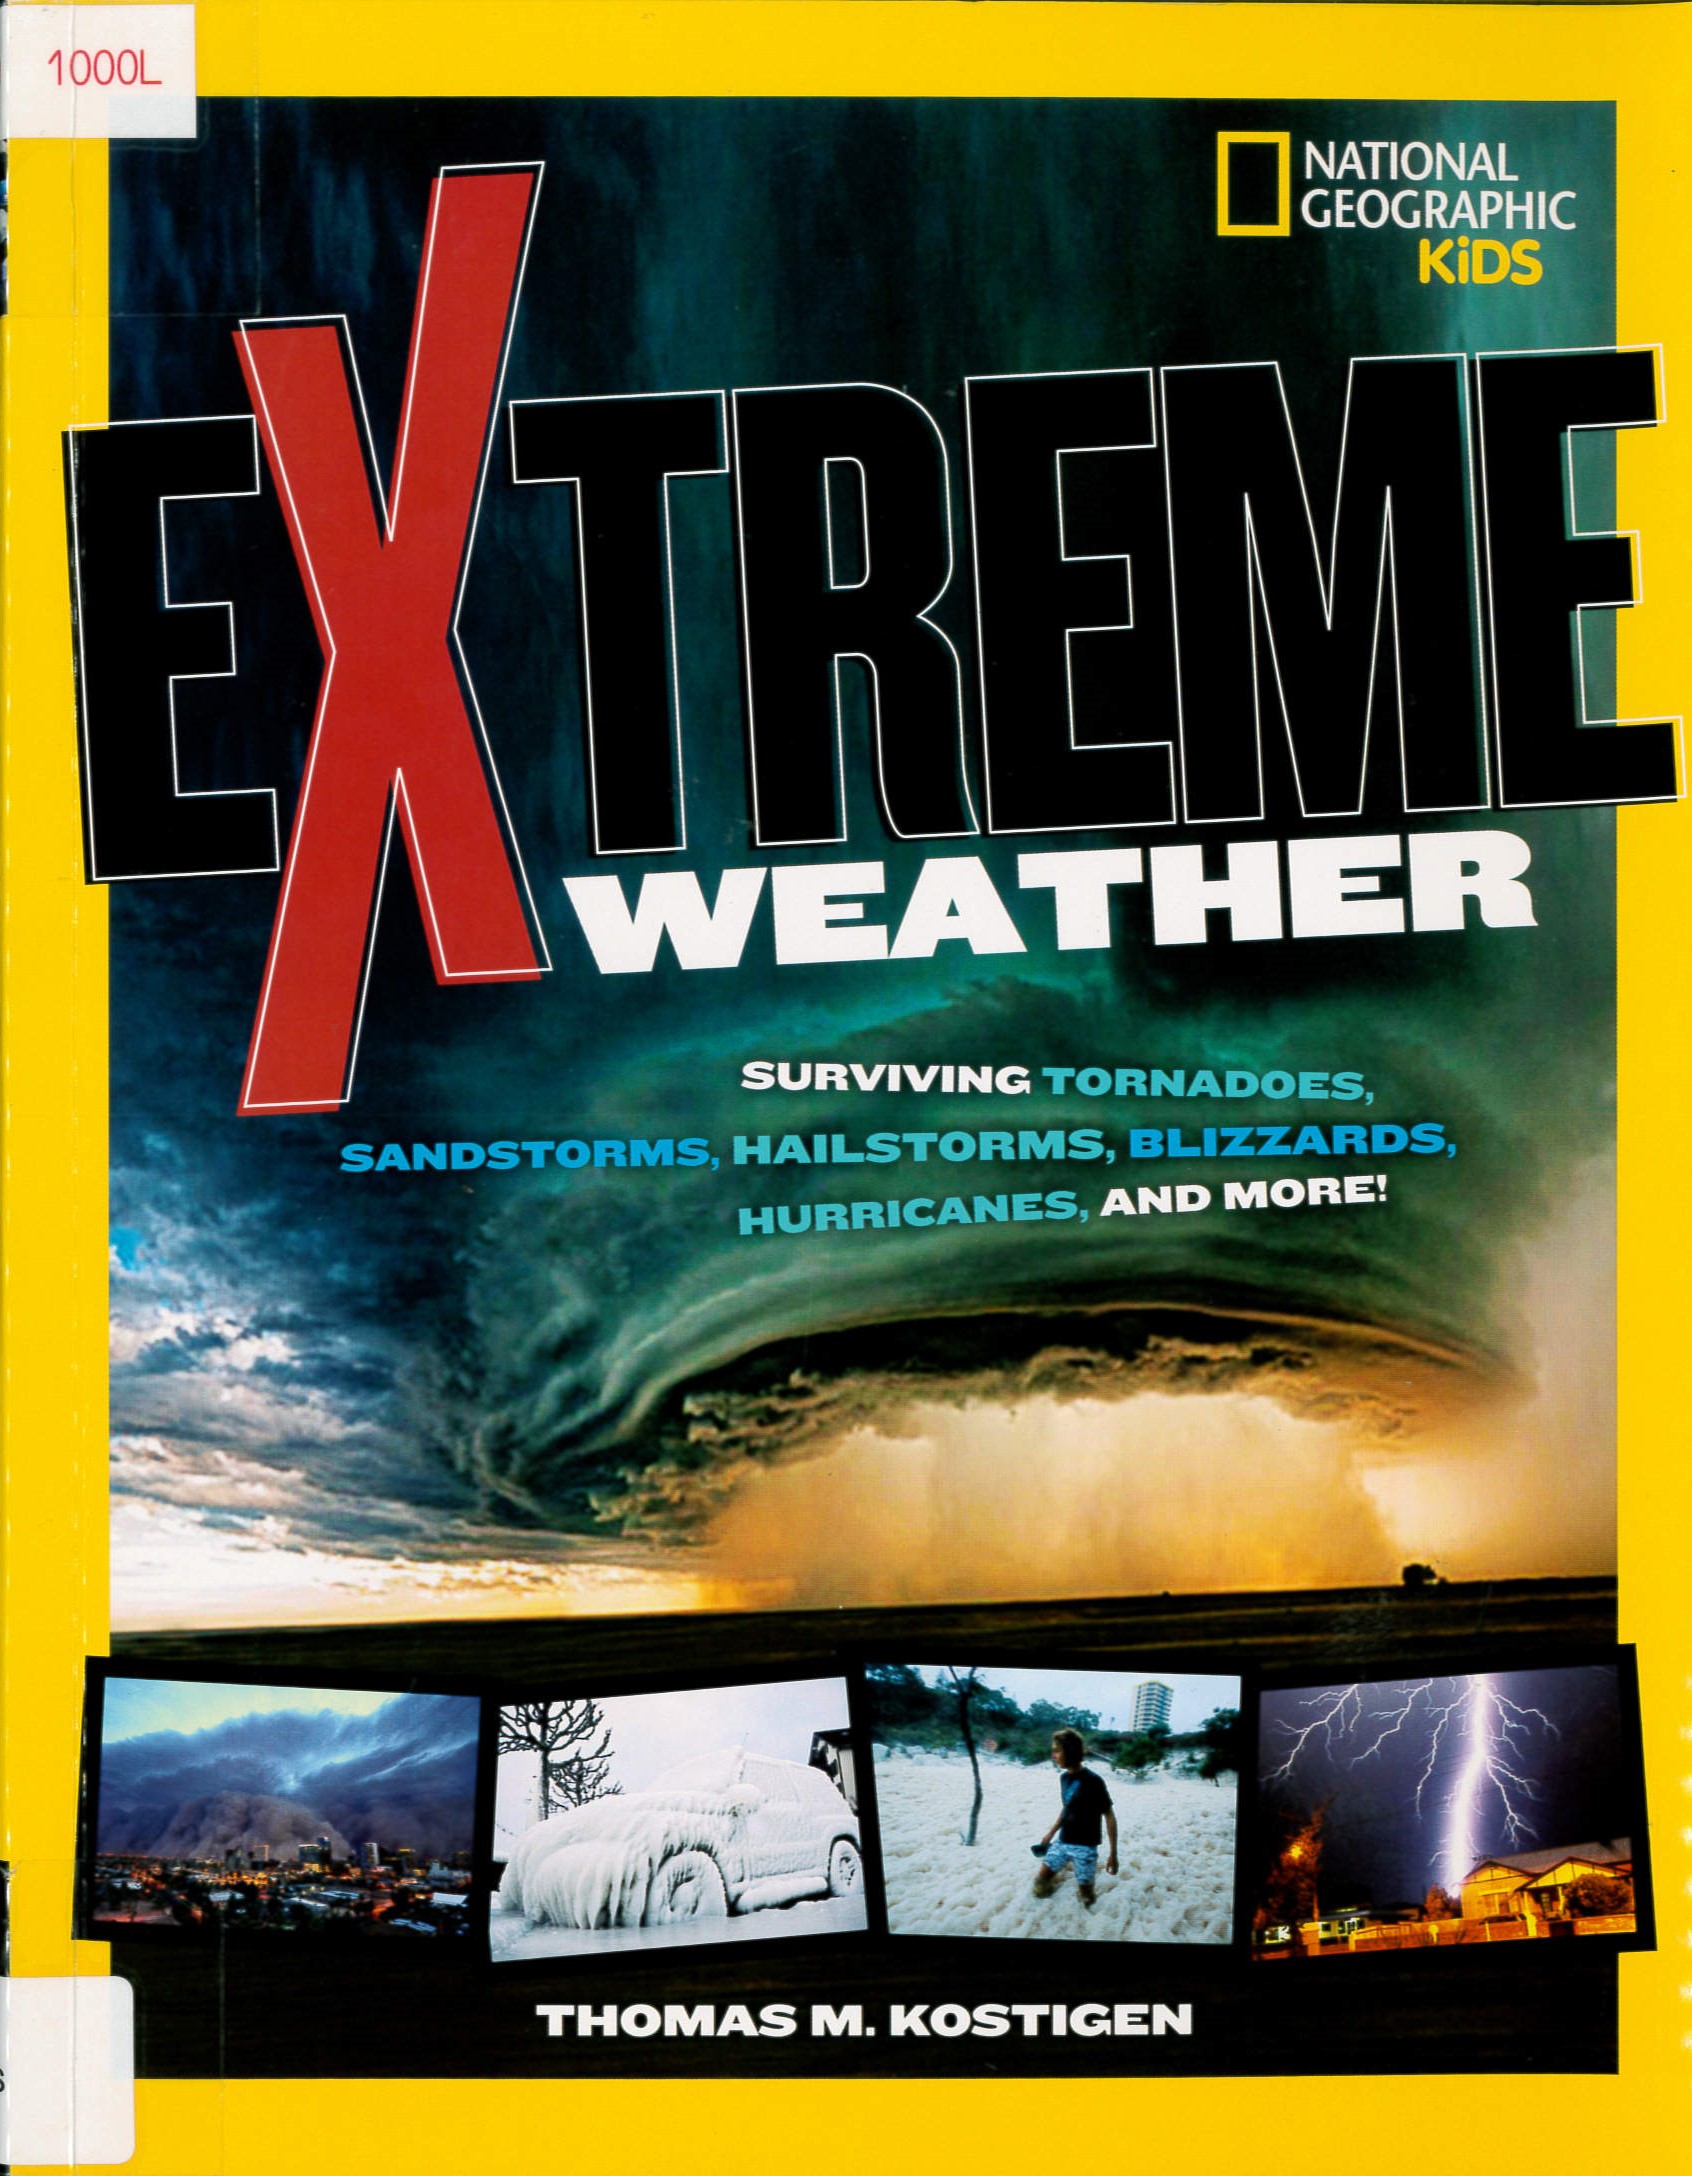 Extreme weather : surviving tornadoes, sandstorms, hailstorms, blizzards, hurricanes, and more! /